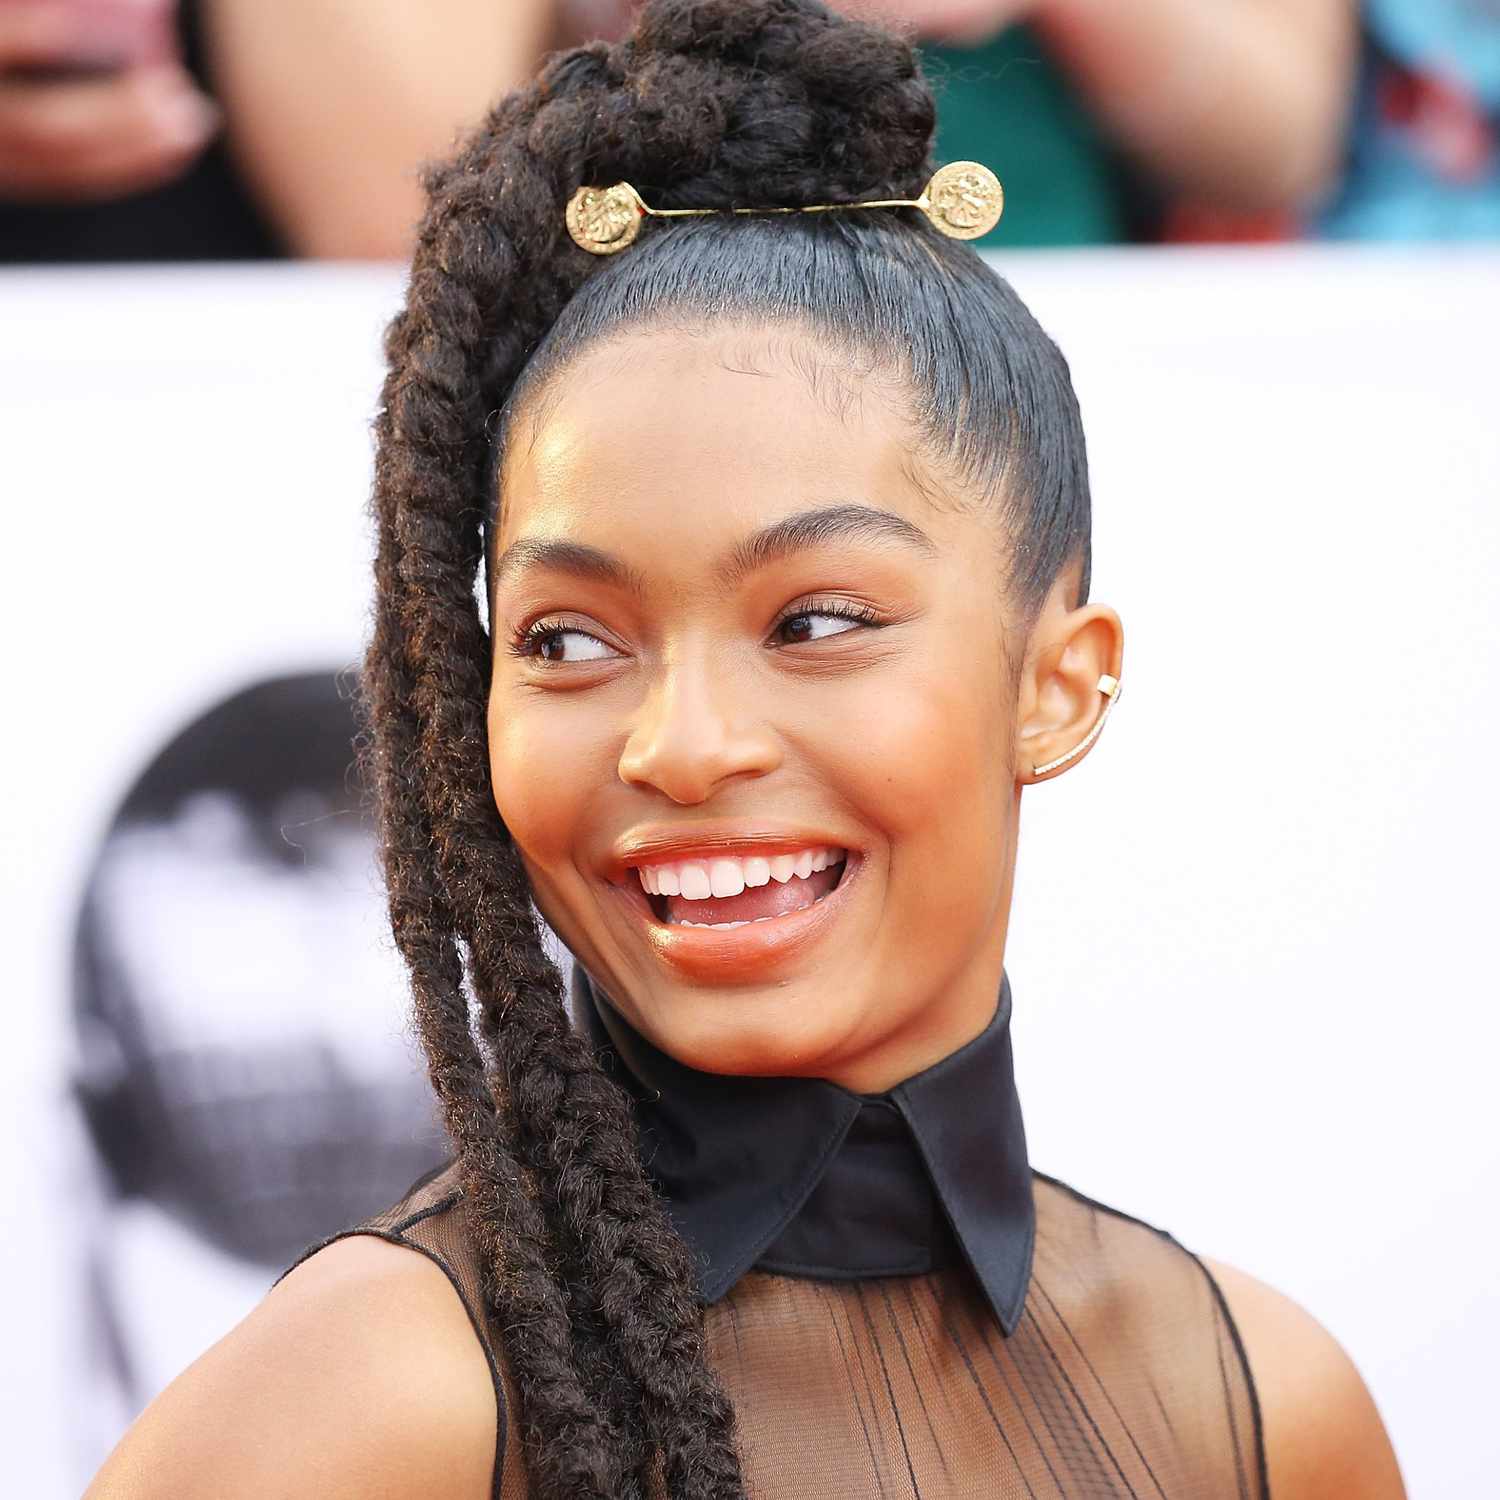 Yara Shahidi wears a high ponytail hairstyle with sleek roots and braided ends